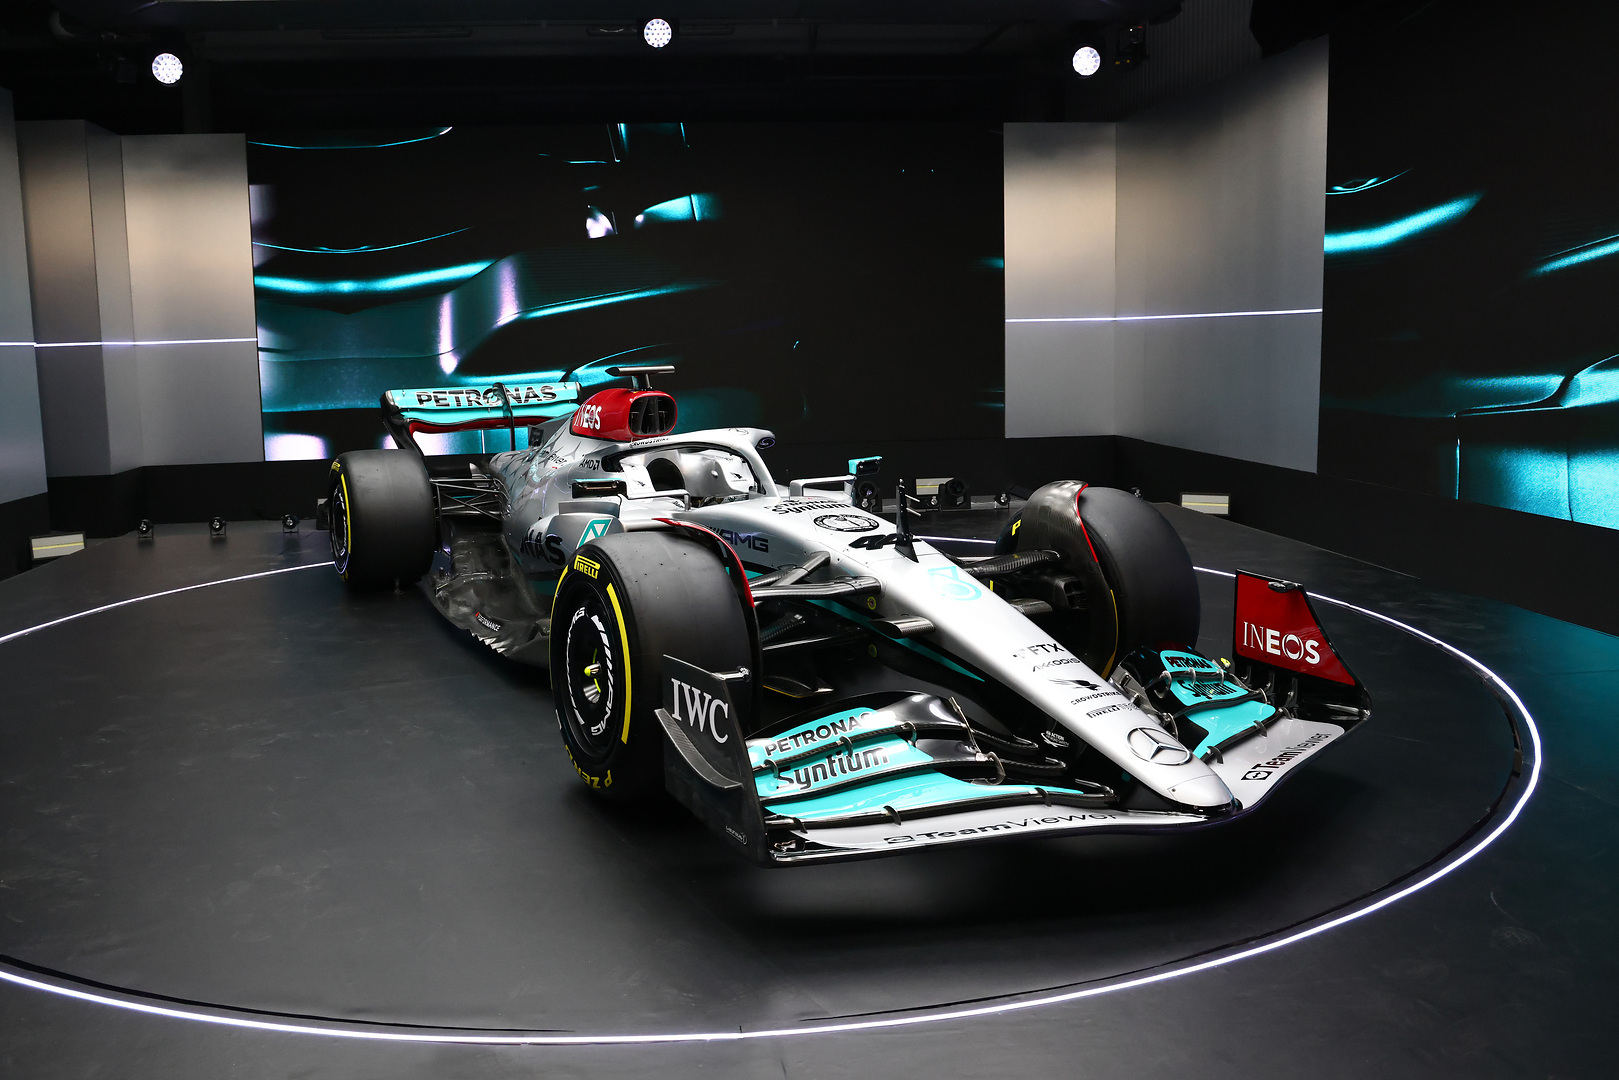 In photo: Every angle of the new Mercedes W13 F1 car